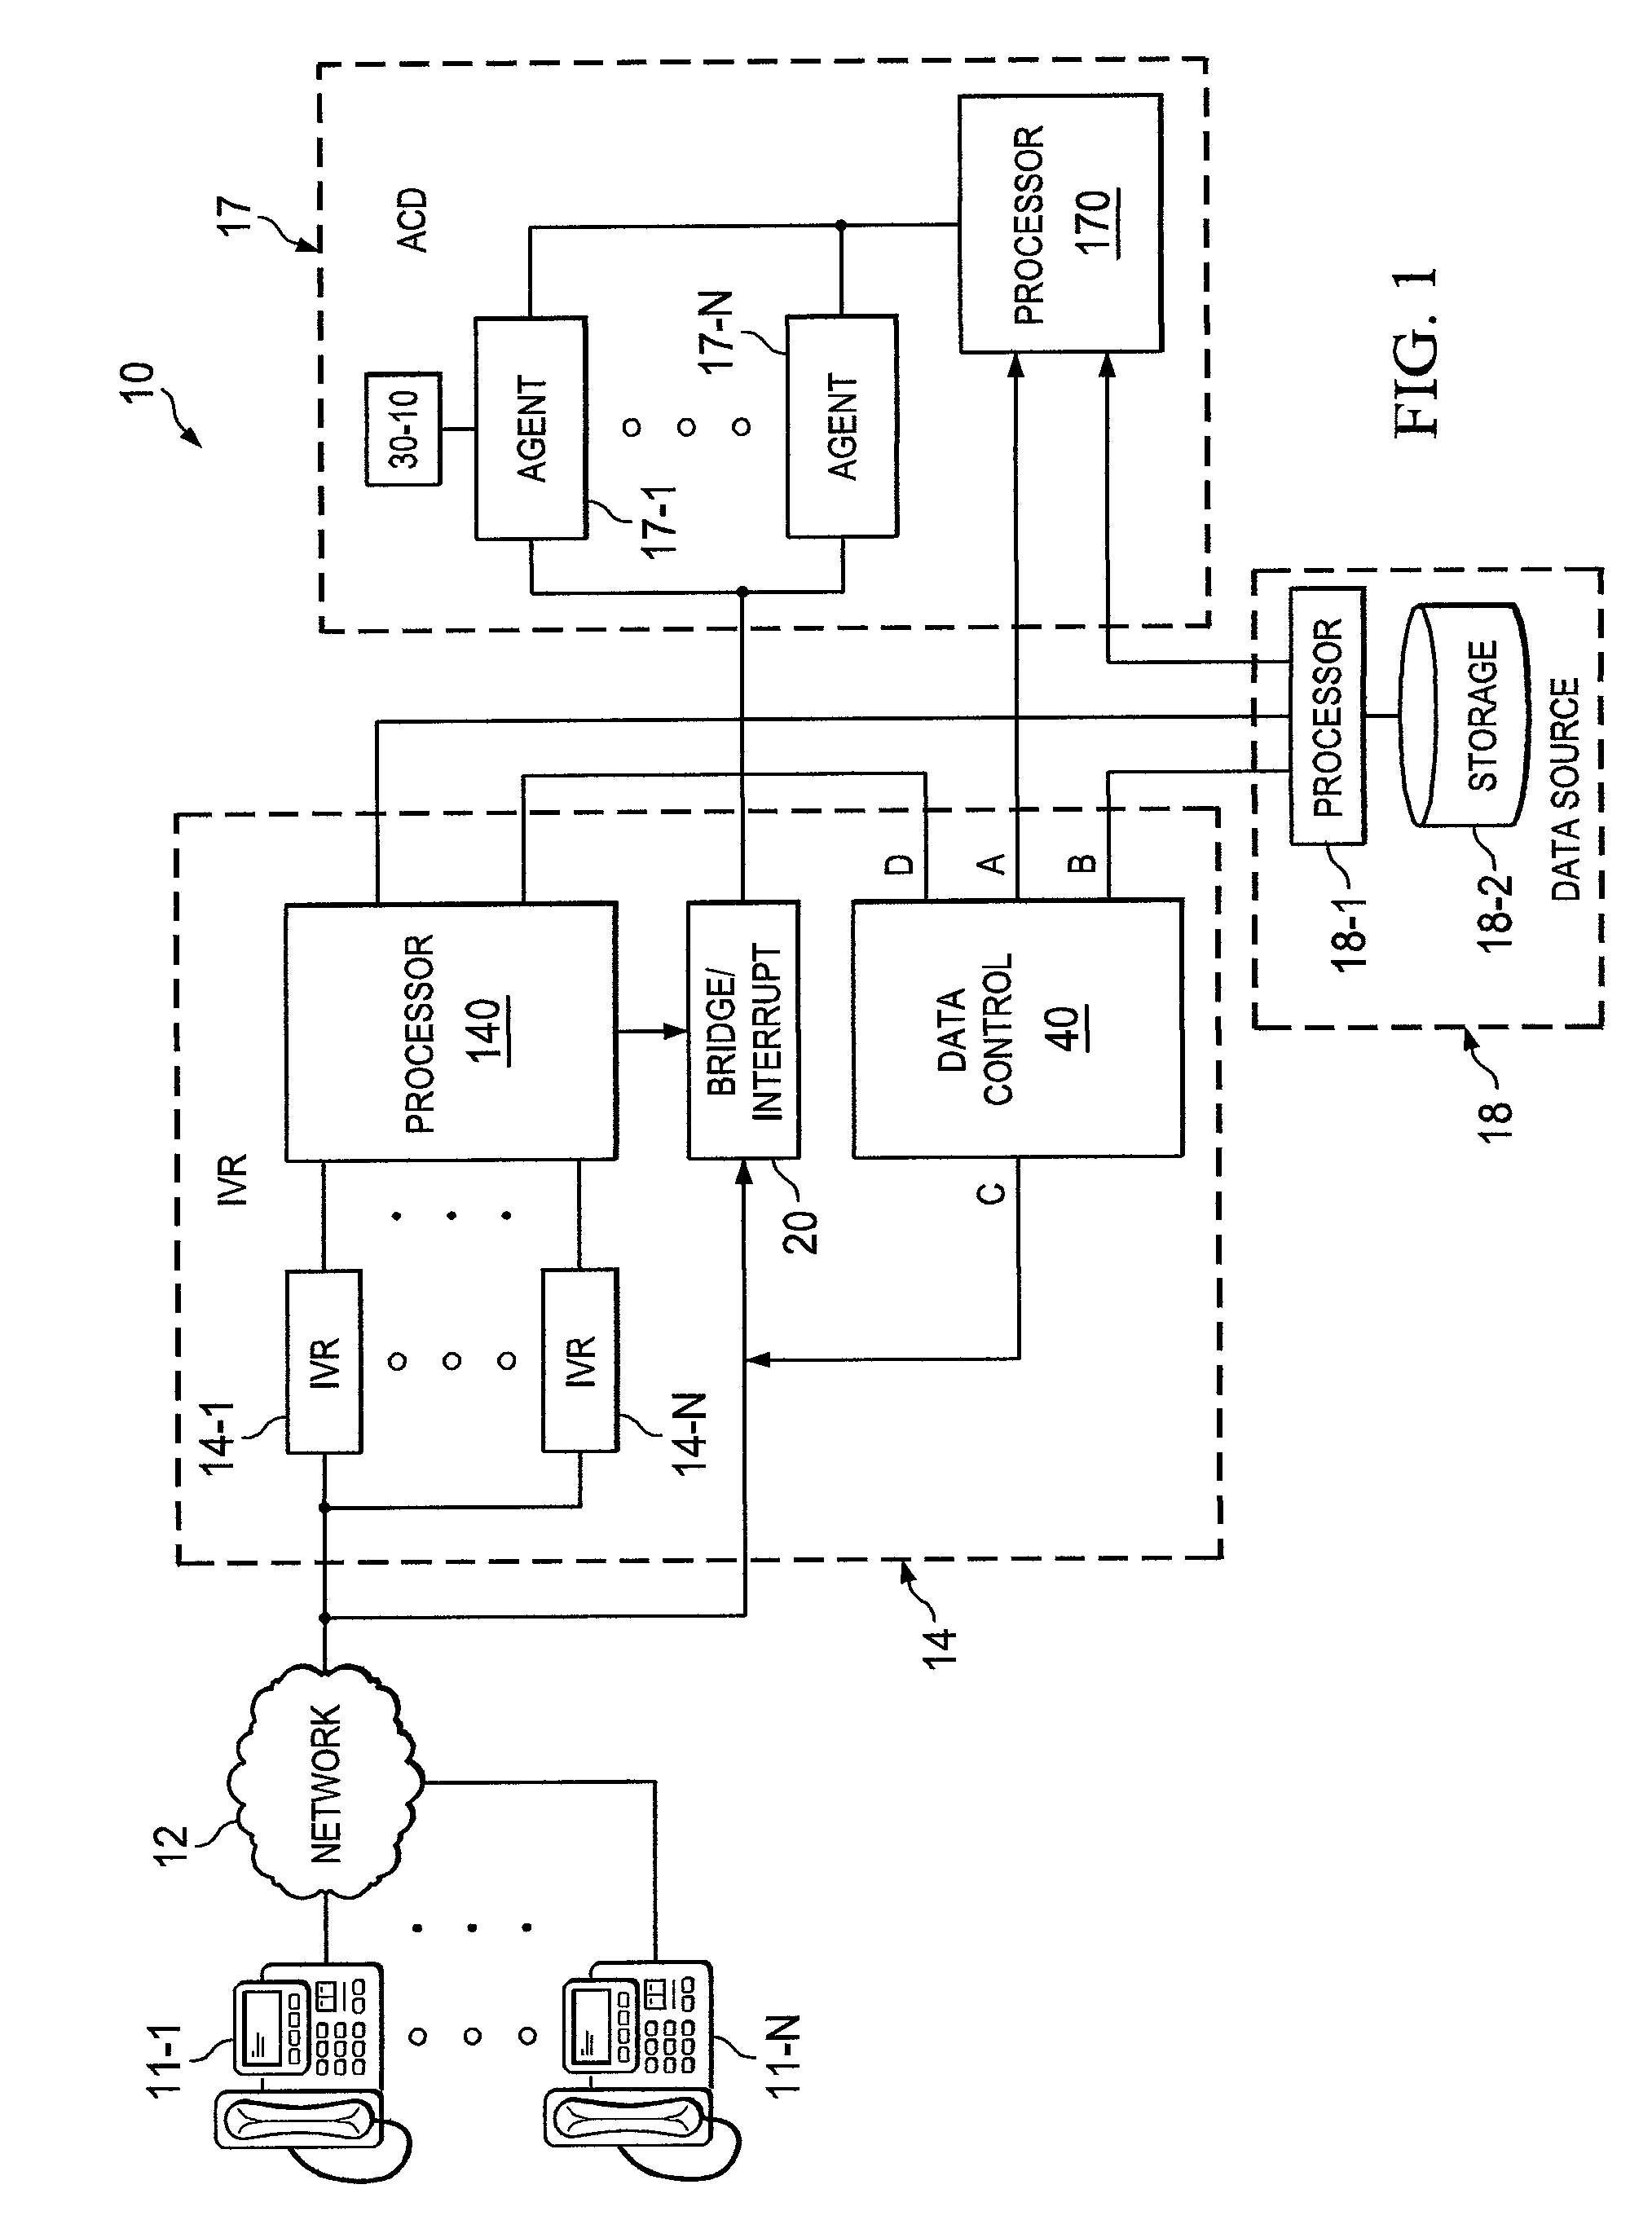 Systems and methods for preventing sensitive information from being communicated into a non-secure environment